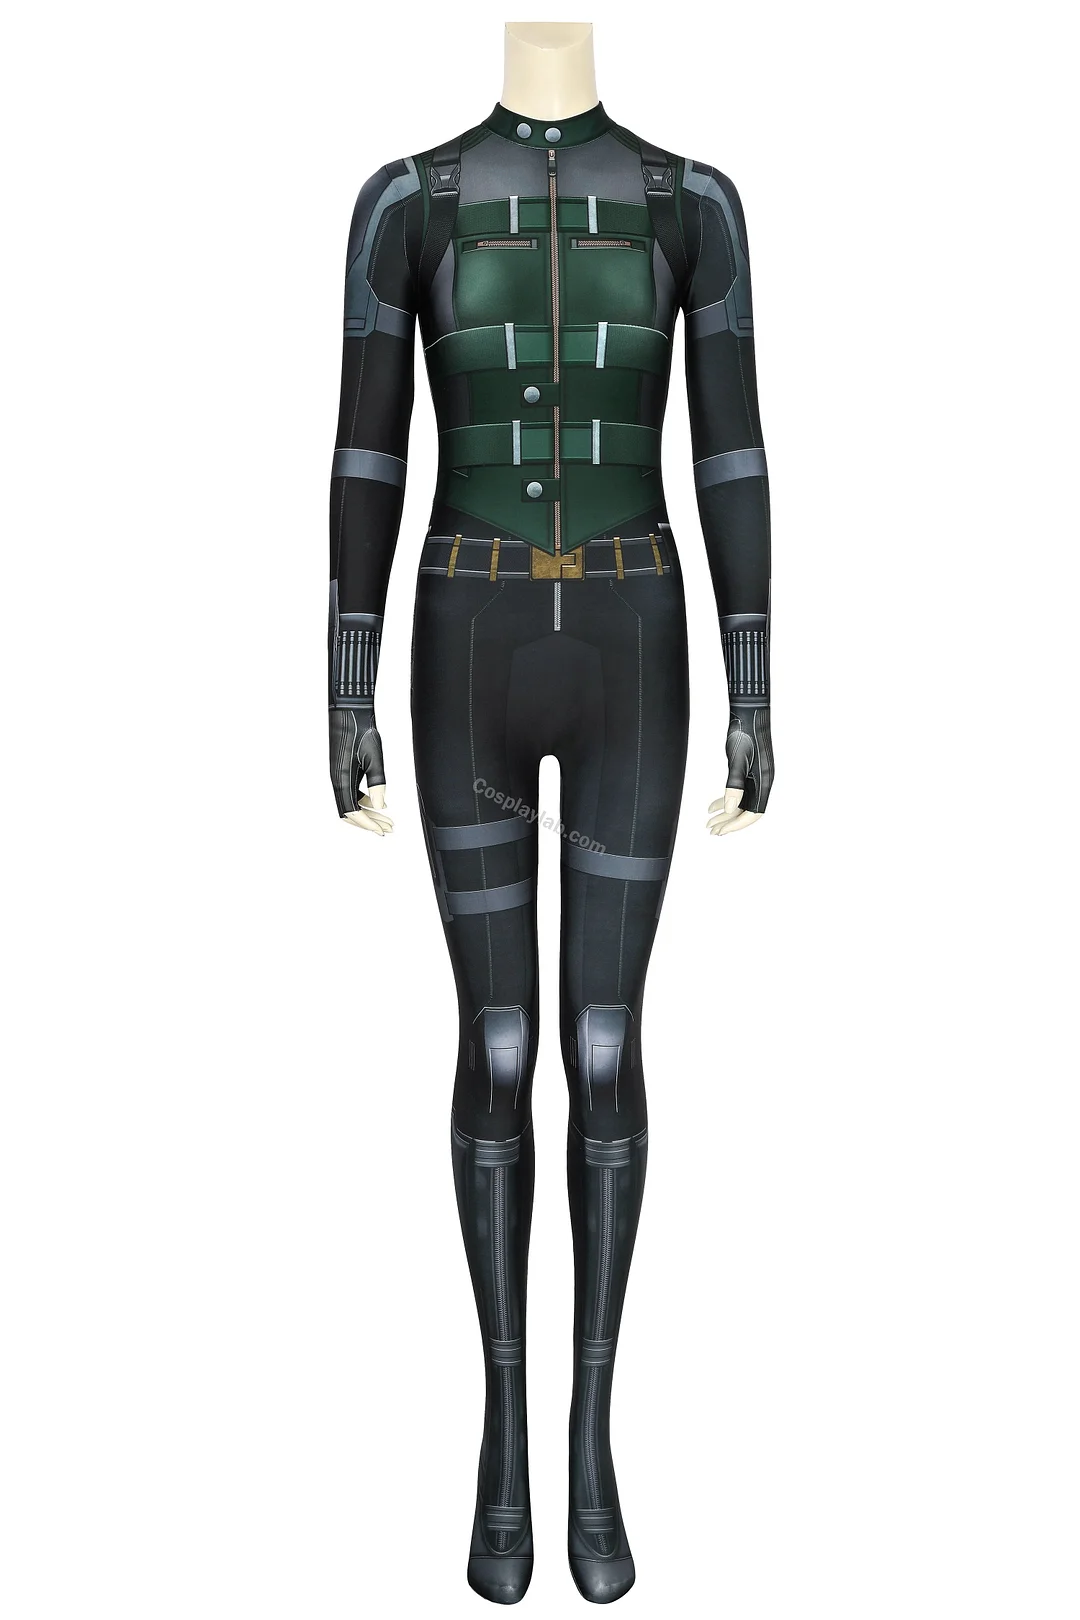 Black Widow Cosplay Suit The Classic Black Widow 3D Printing Spandex Costume Jumpsuit By CosplayLab